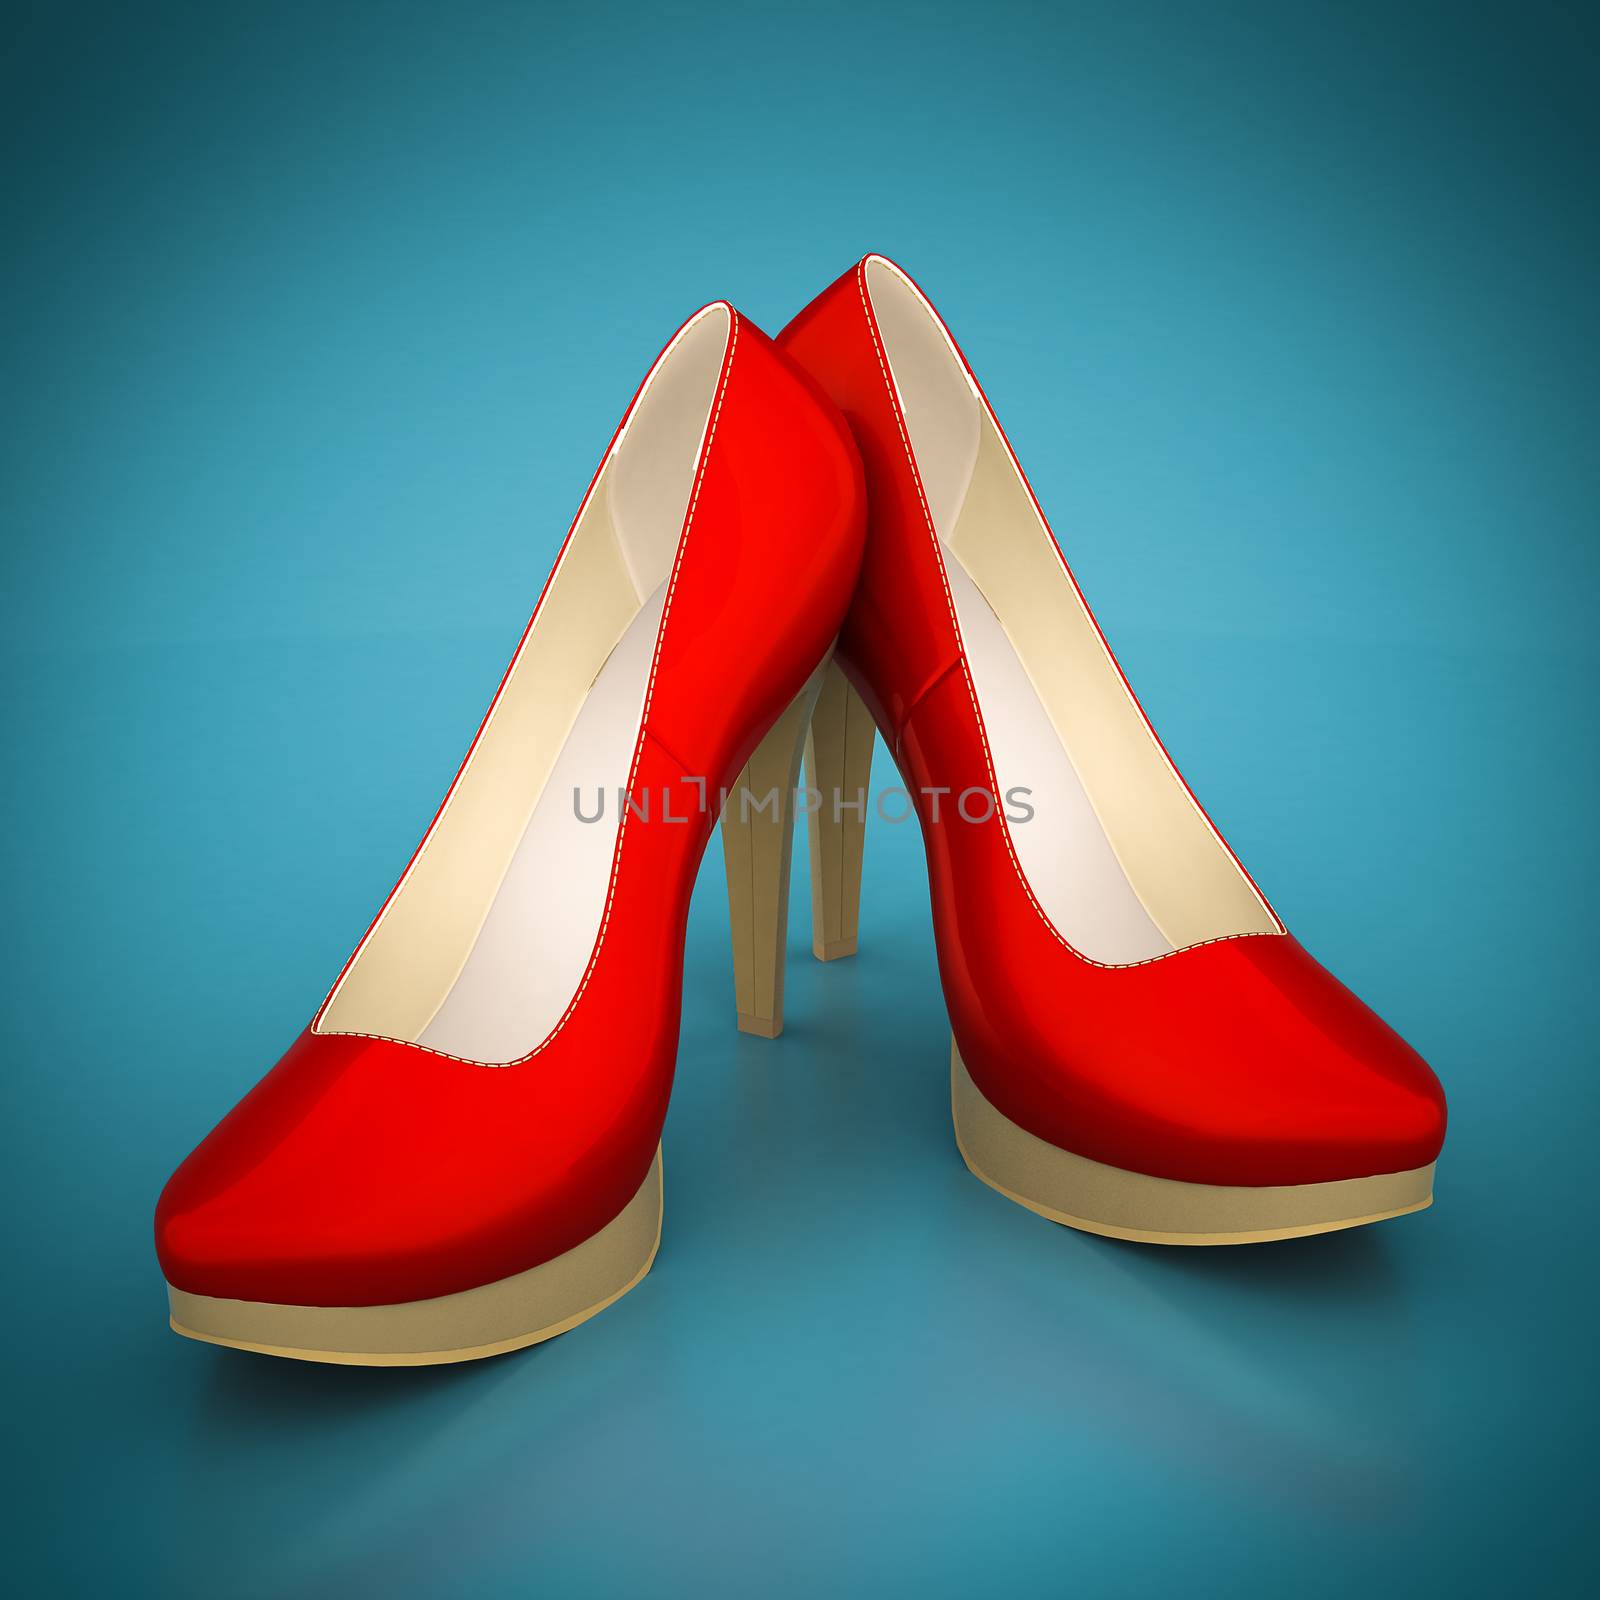 High heel shoes by mrgarry